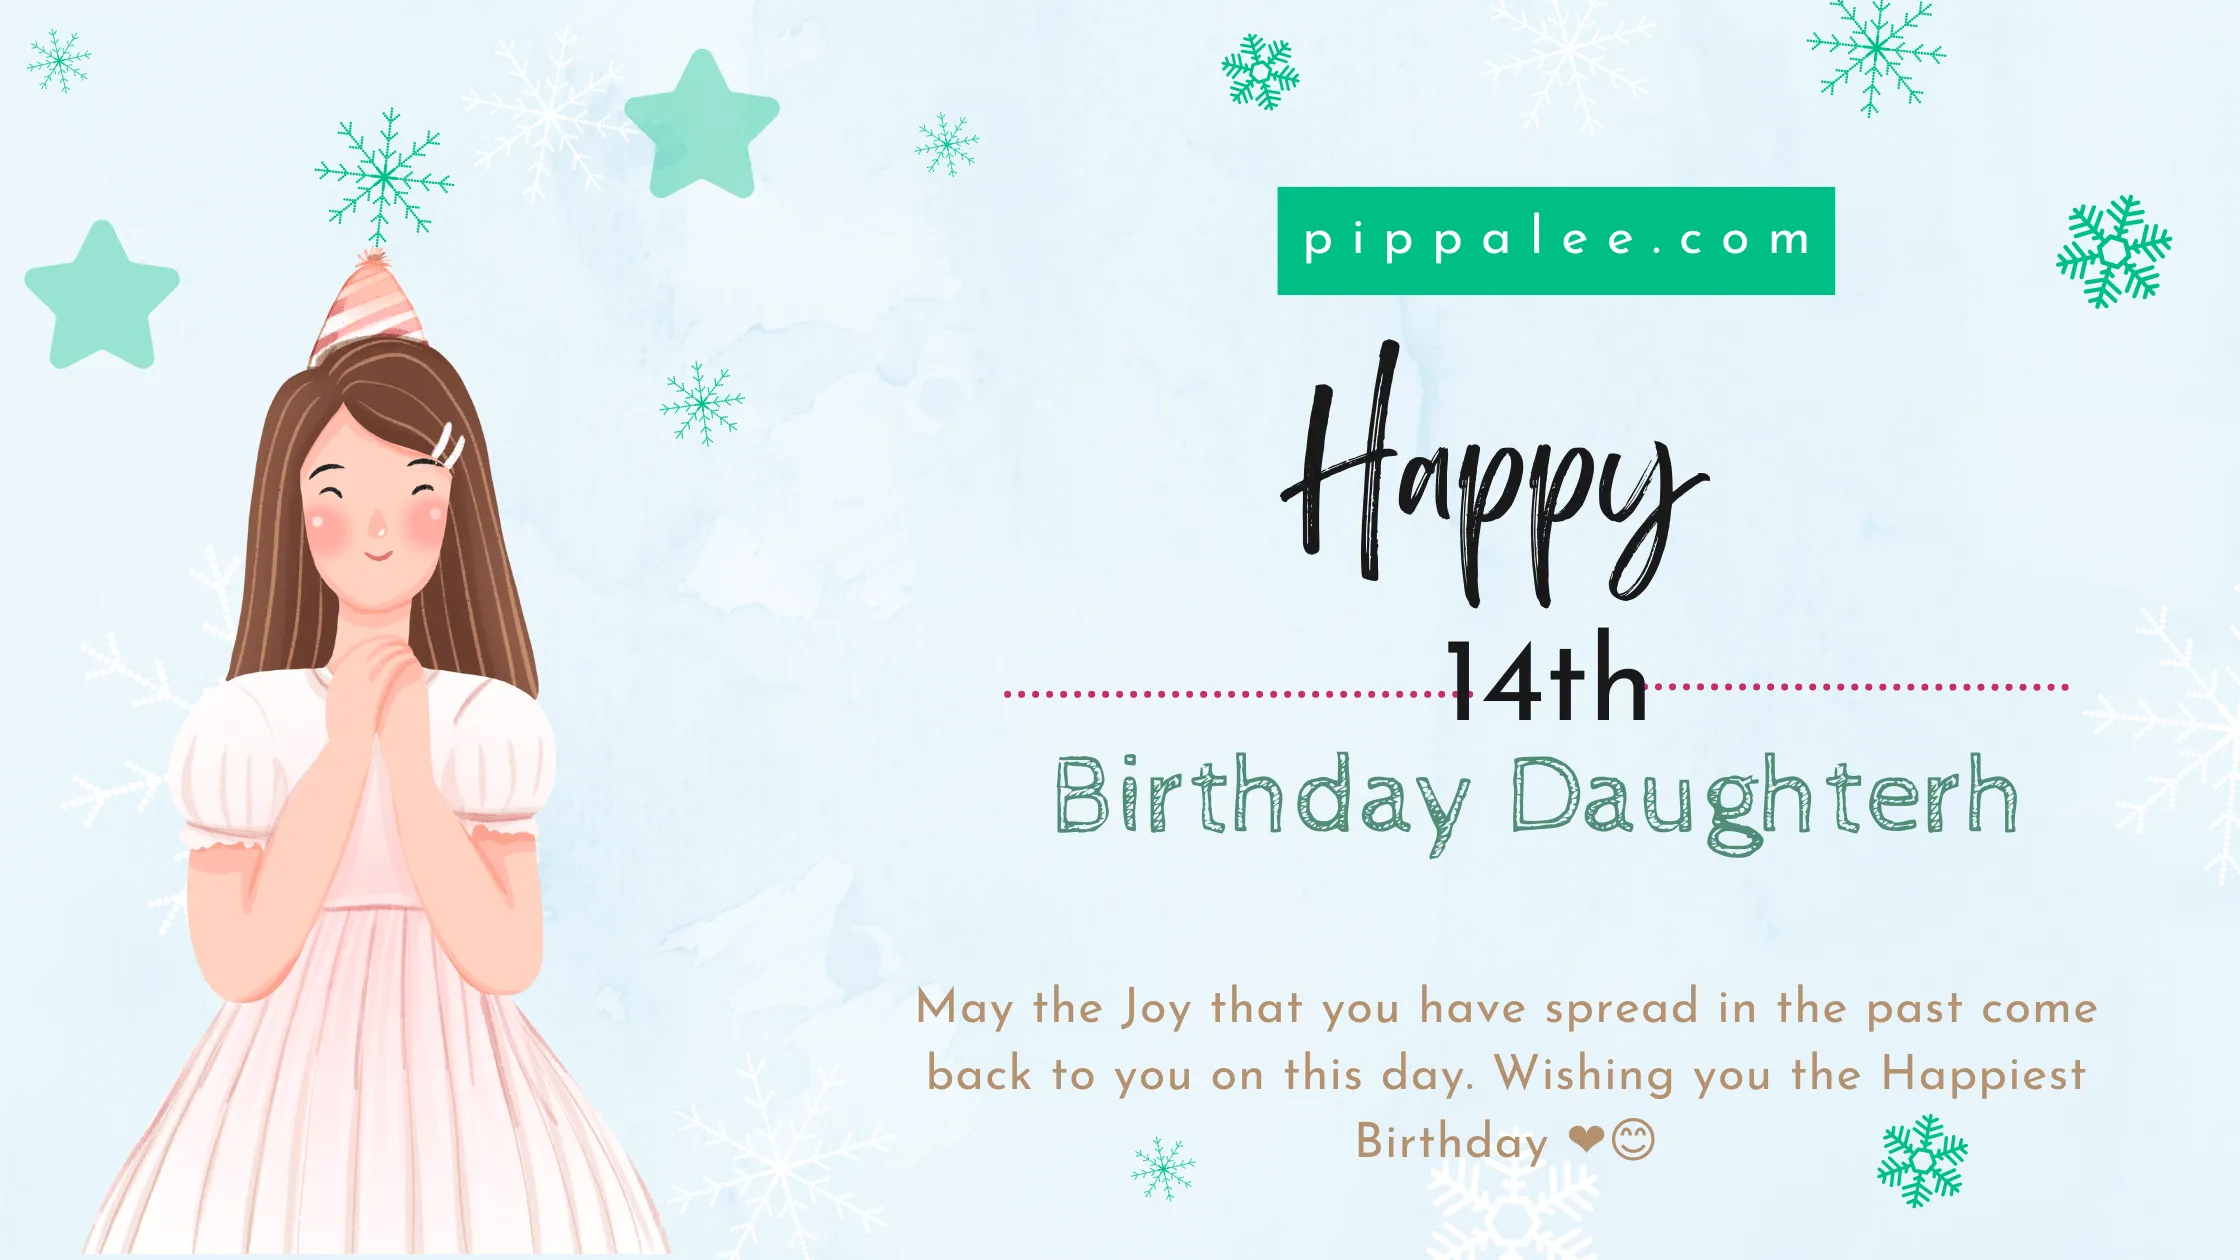 Happy 14th Birthday Daughter - Wishes & Messages